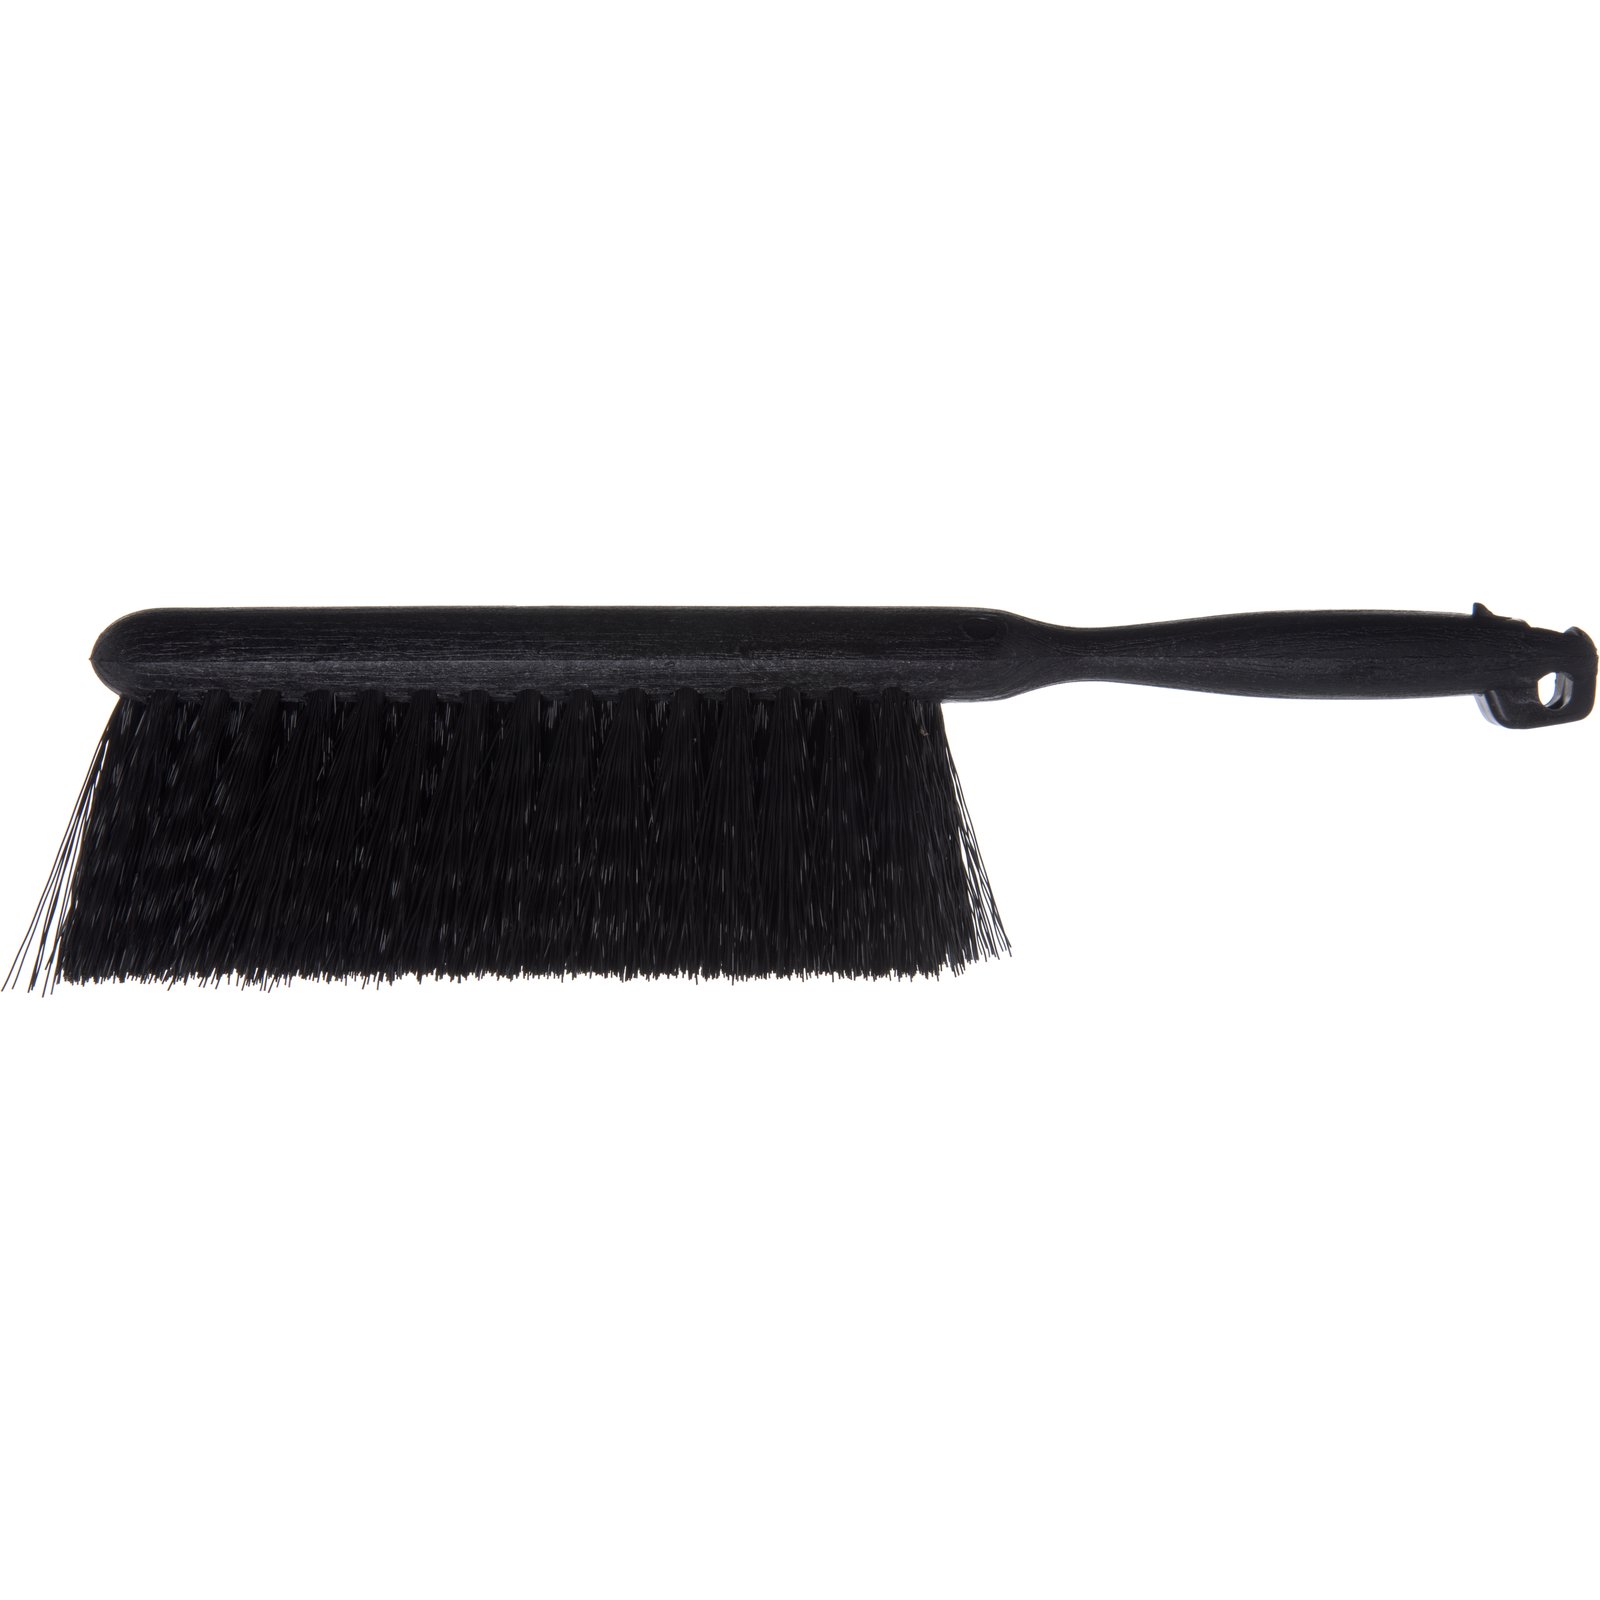 Flo-Pac Counter / Bench Brush with Flagged Polypropylene Bristles - Bunzl  Processor Division